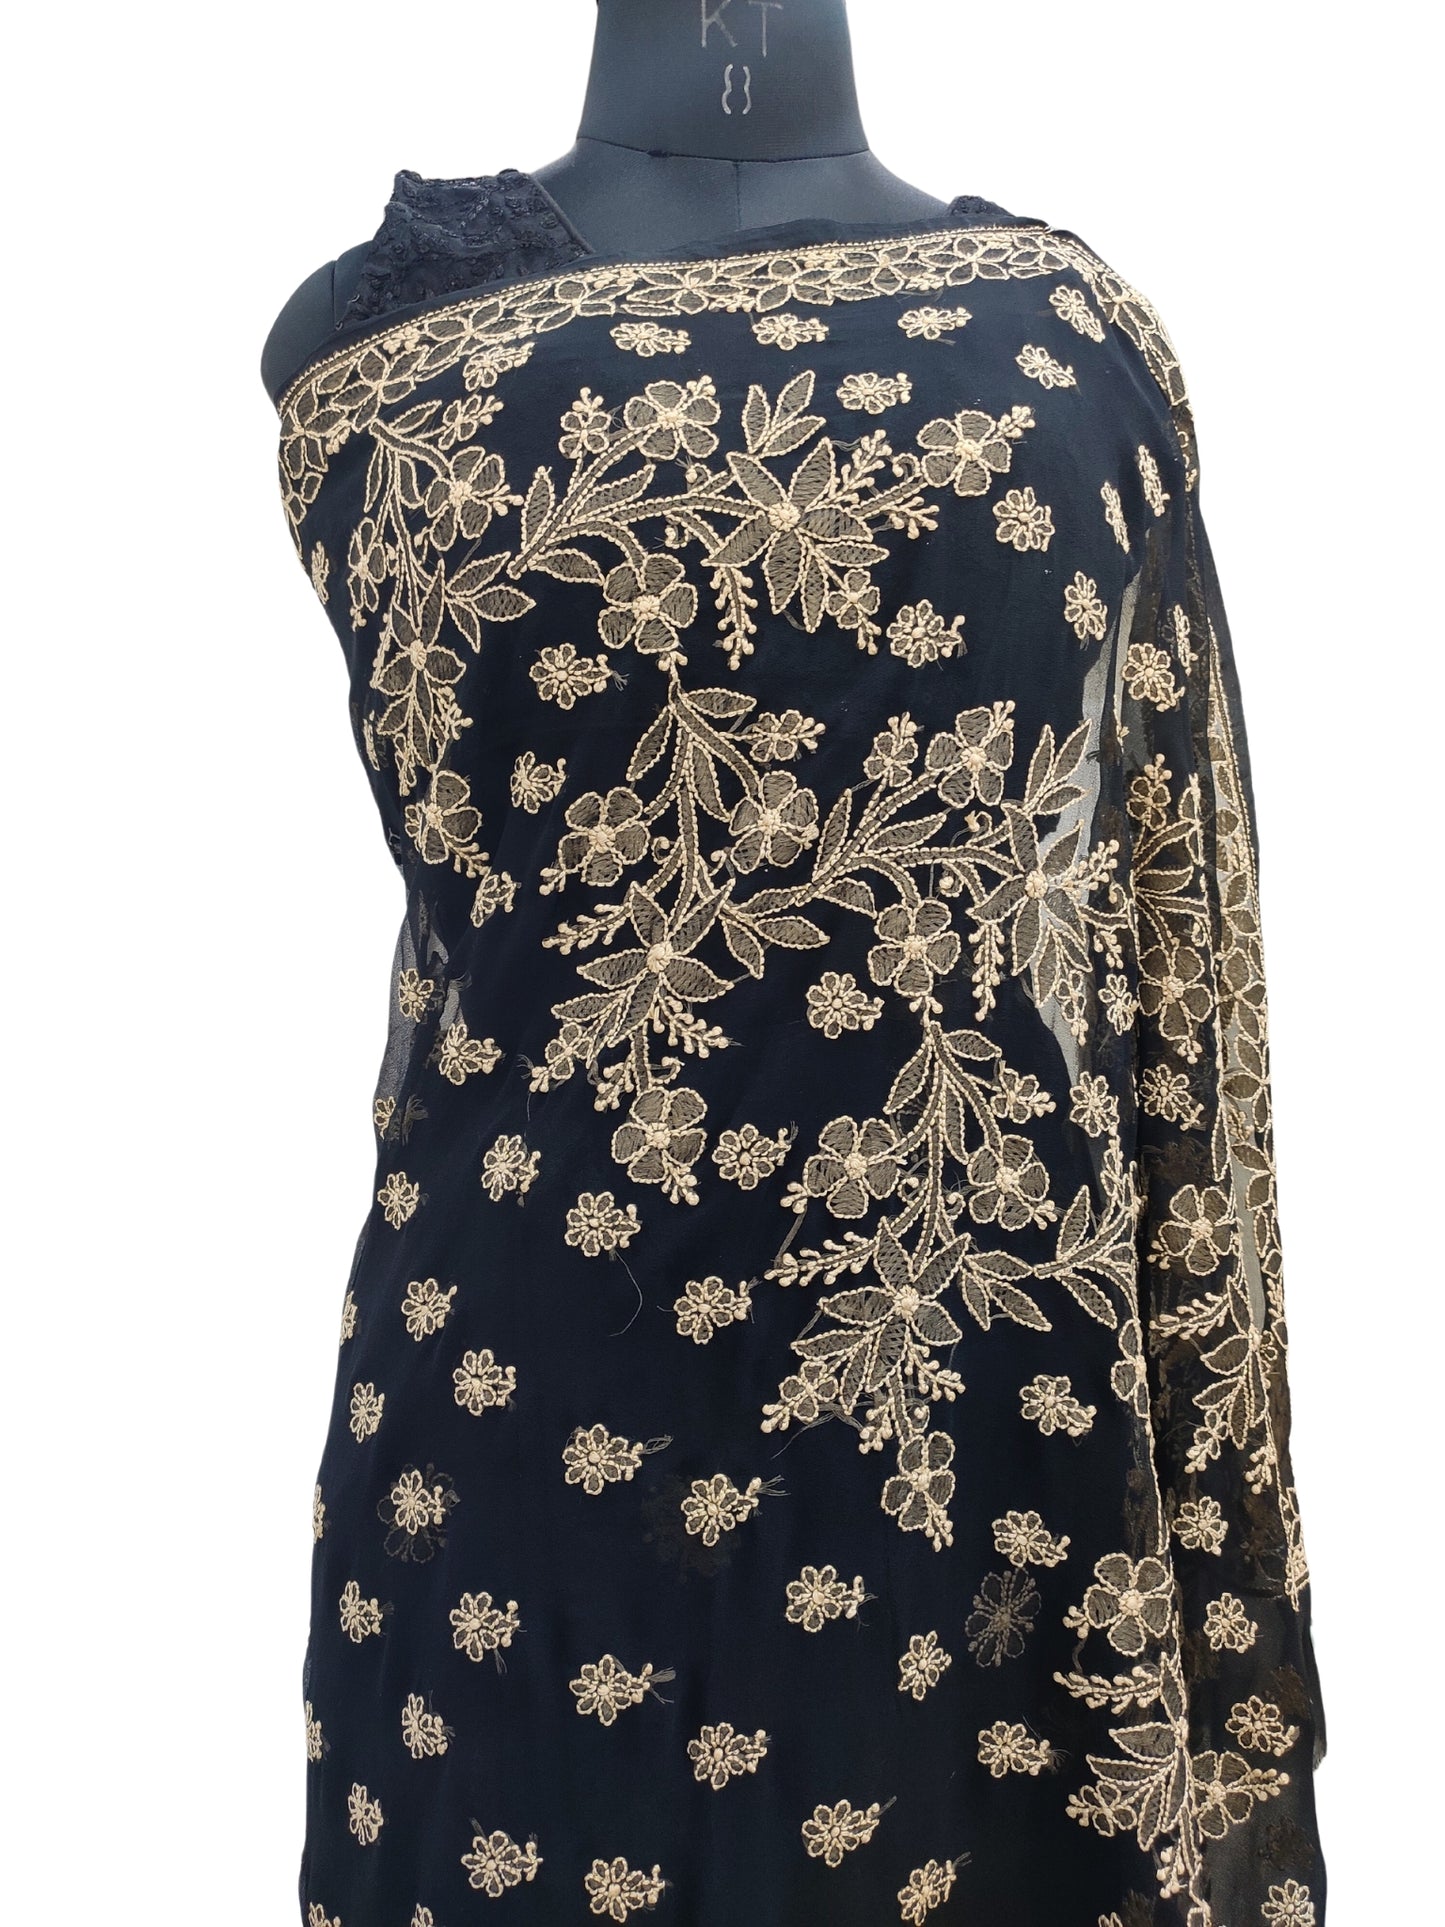 Shyamal Chikan Hand Embroidered Black Georgette Lucknowi Chikankari Shoulder Jaal Saree With Blouse Piece - S18310